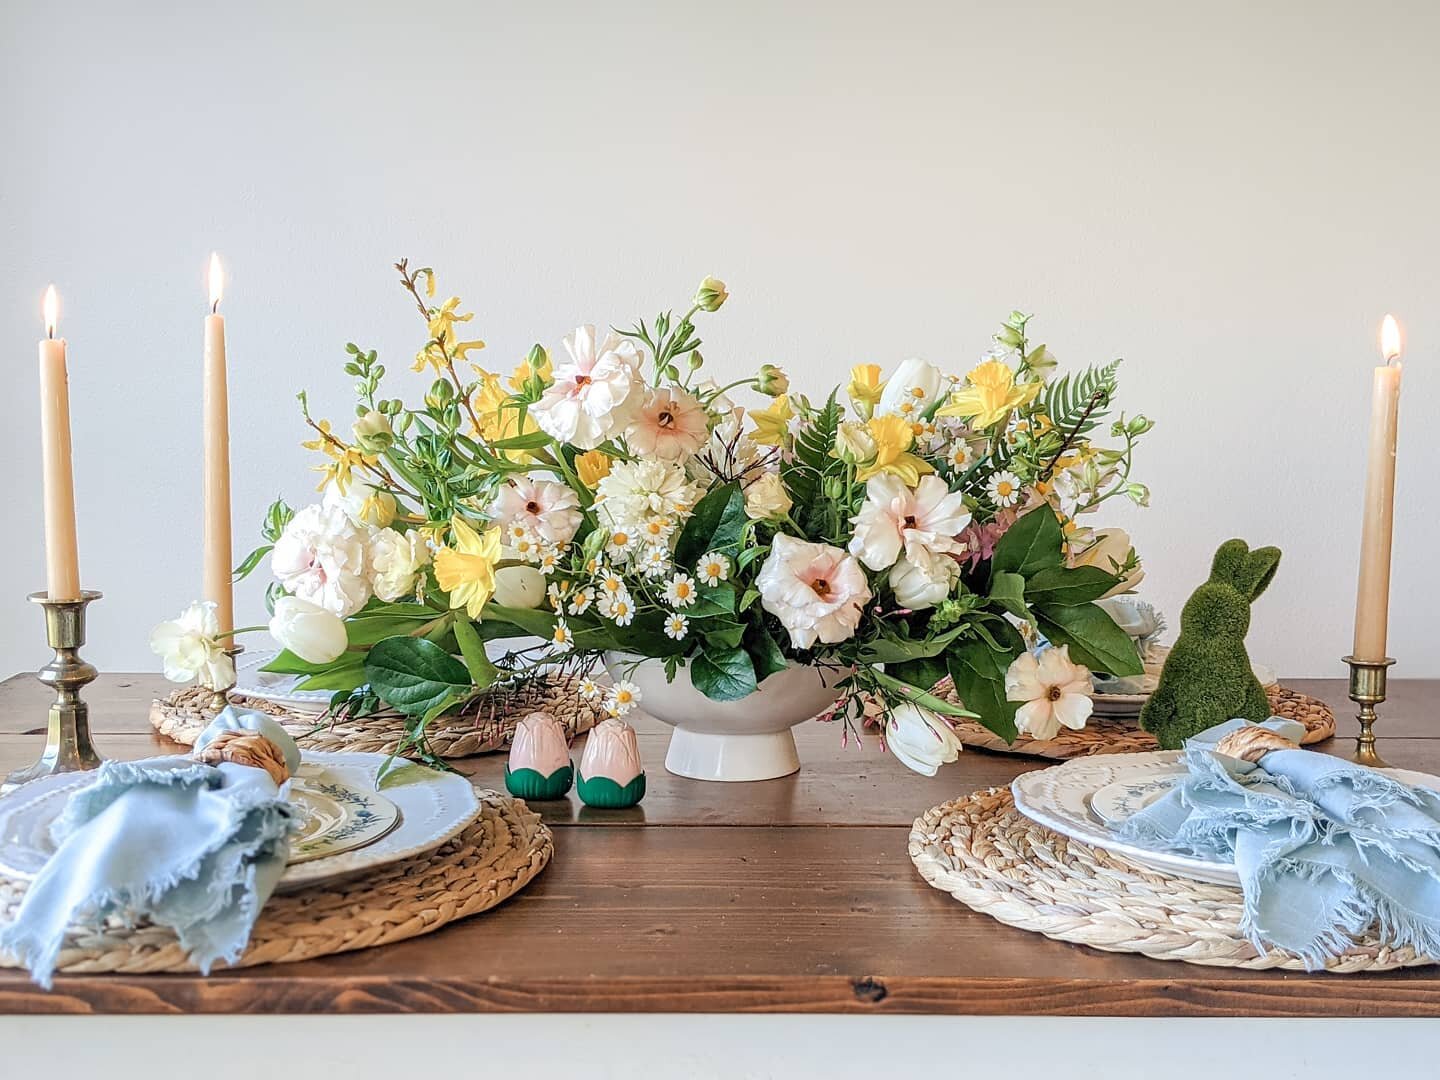 Proudly celebrating St. Patrick's Day while looking forward to Easter! If you're looking to make your Easter table extra beautiful this year, I can certainly help you with that. Centerpieces launch *tomorrow*!